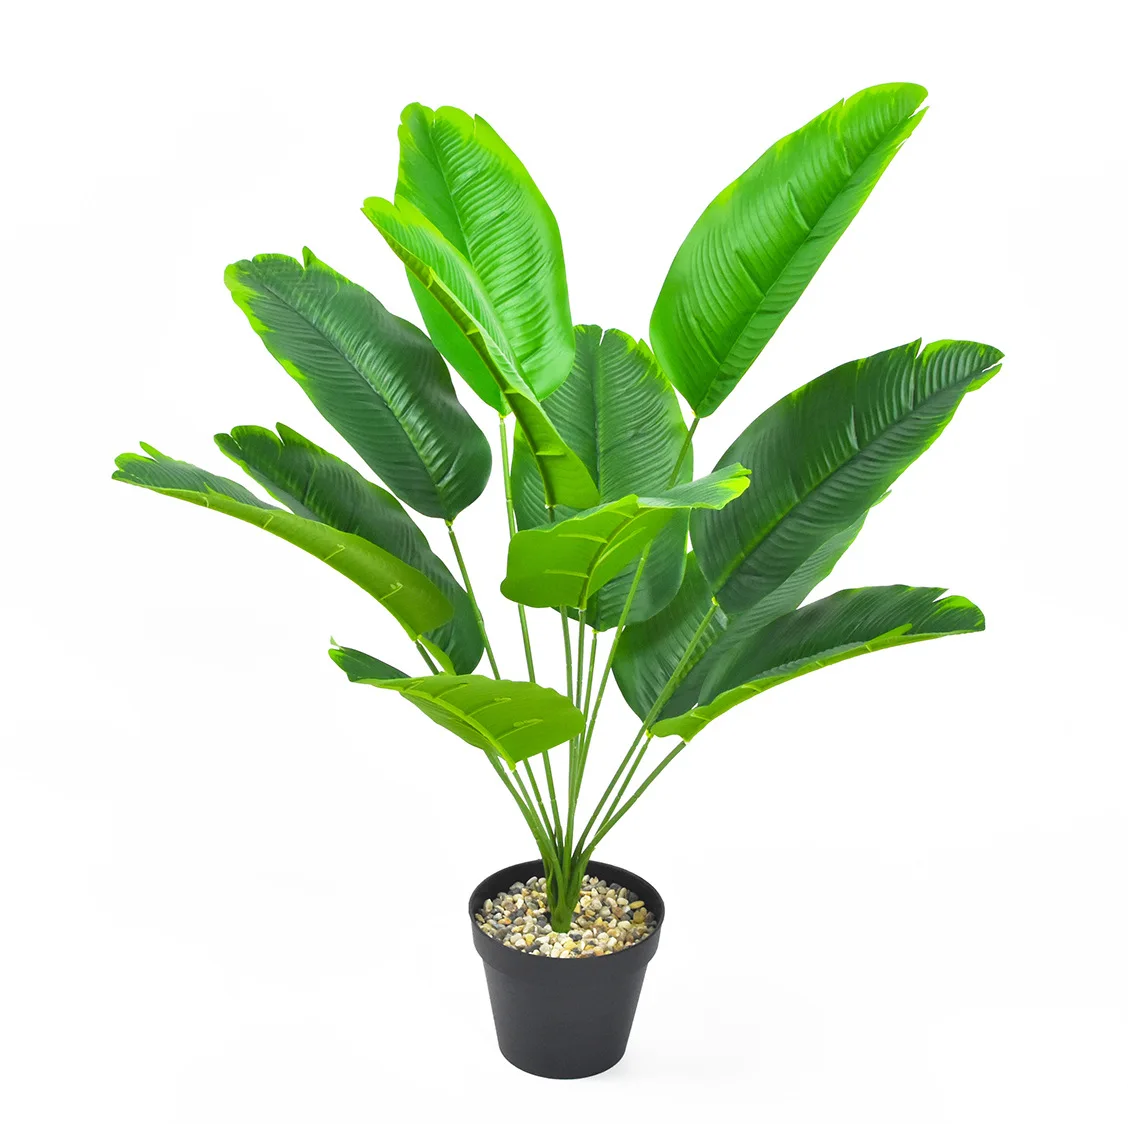 

65cm High 12-fork Simulation Green Banana Leaves, Best-selling Real Touch, High-quality, Creative Home, Window,Bonsai Decoration